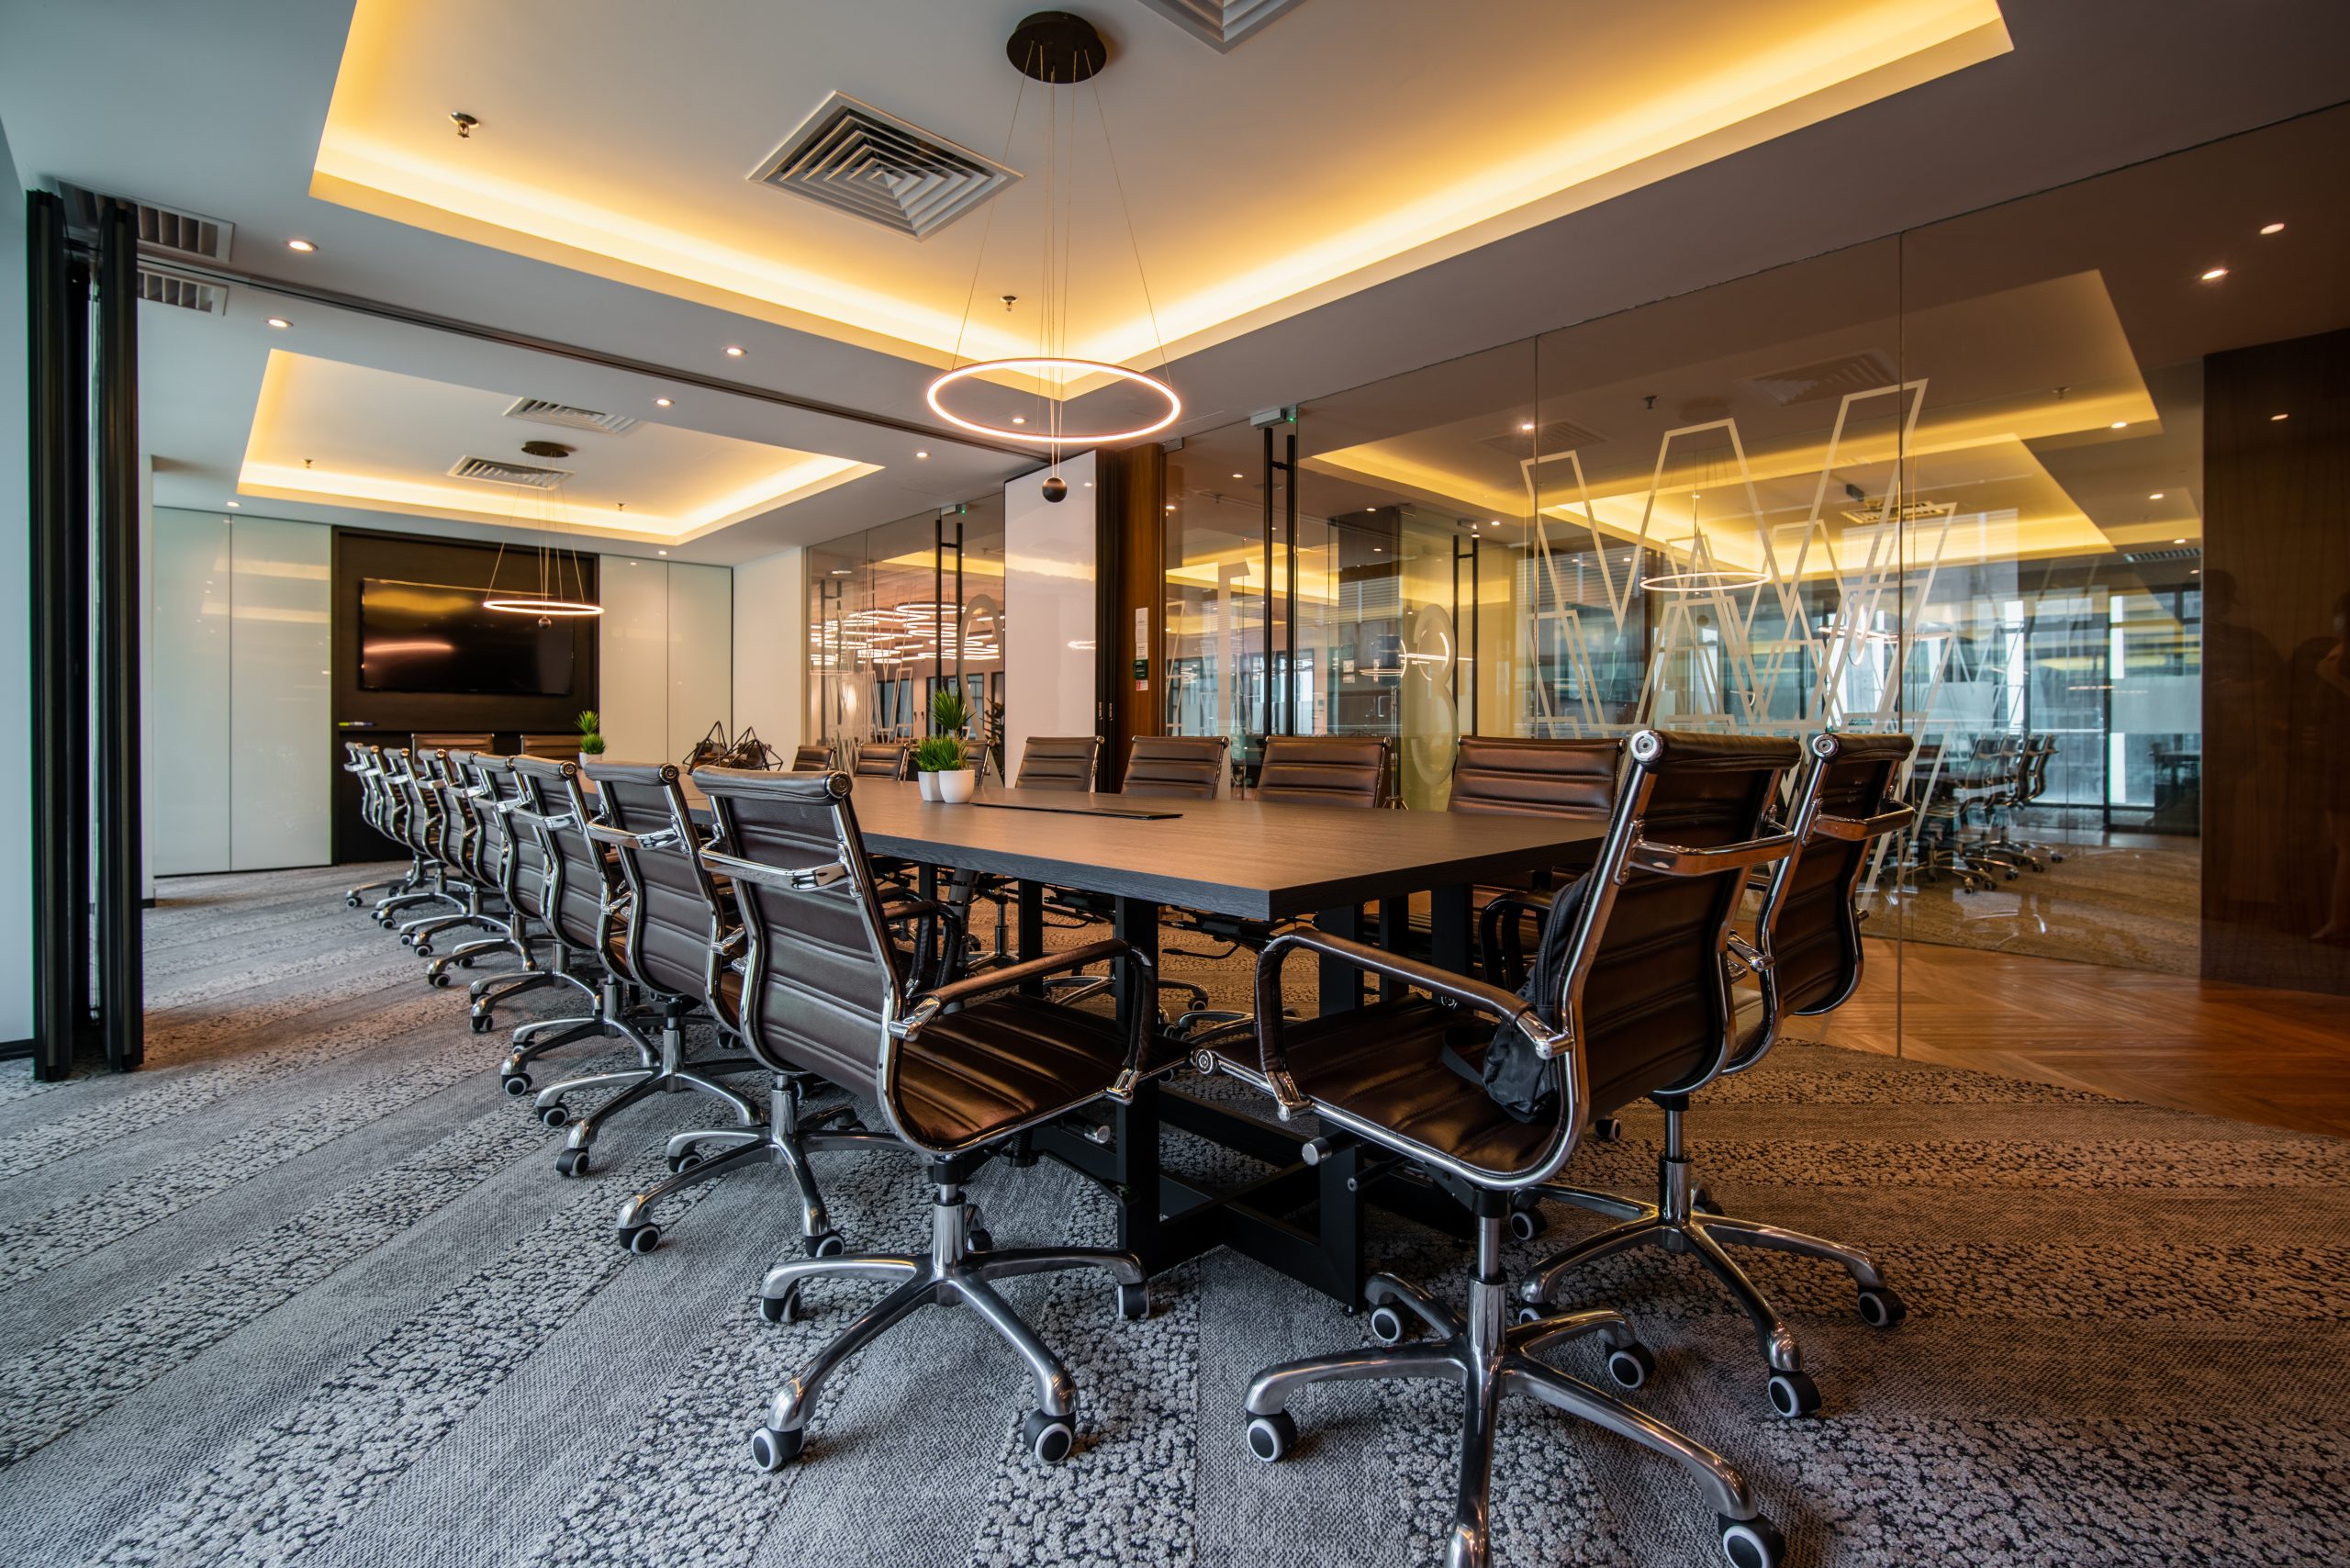 GT meeting room scaled – Getting an office in Kuala Lumpur